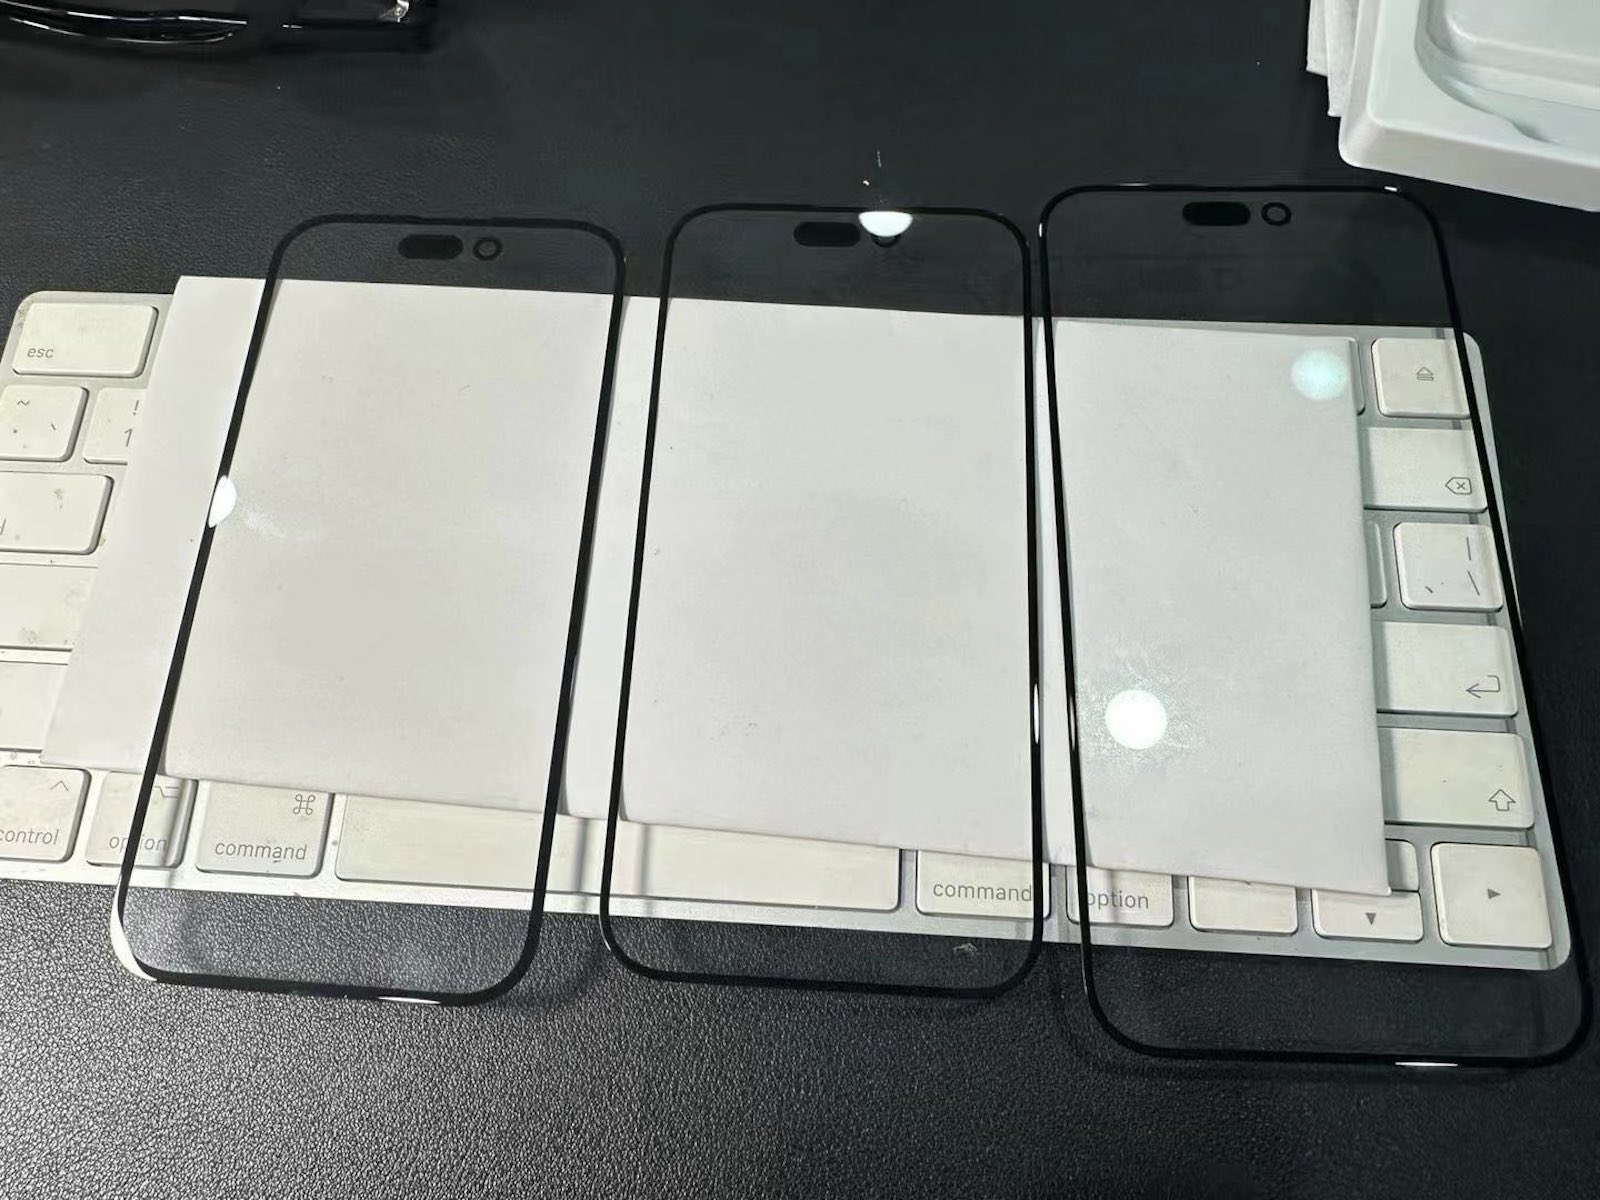 Iphone15 series dynamic island front glass panel